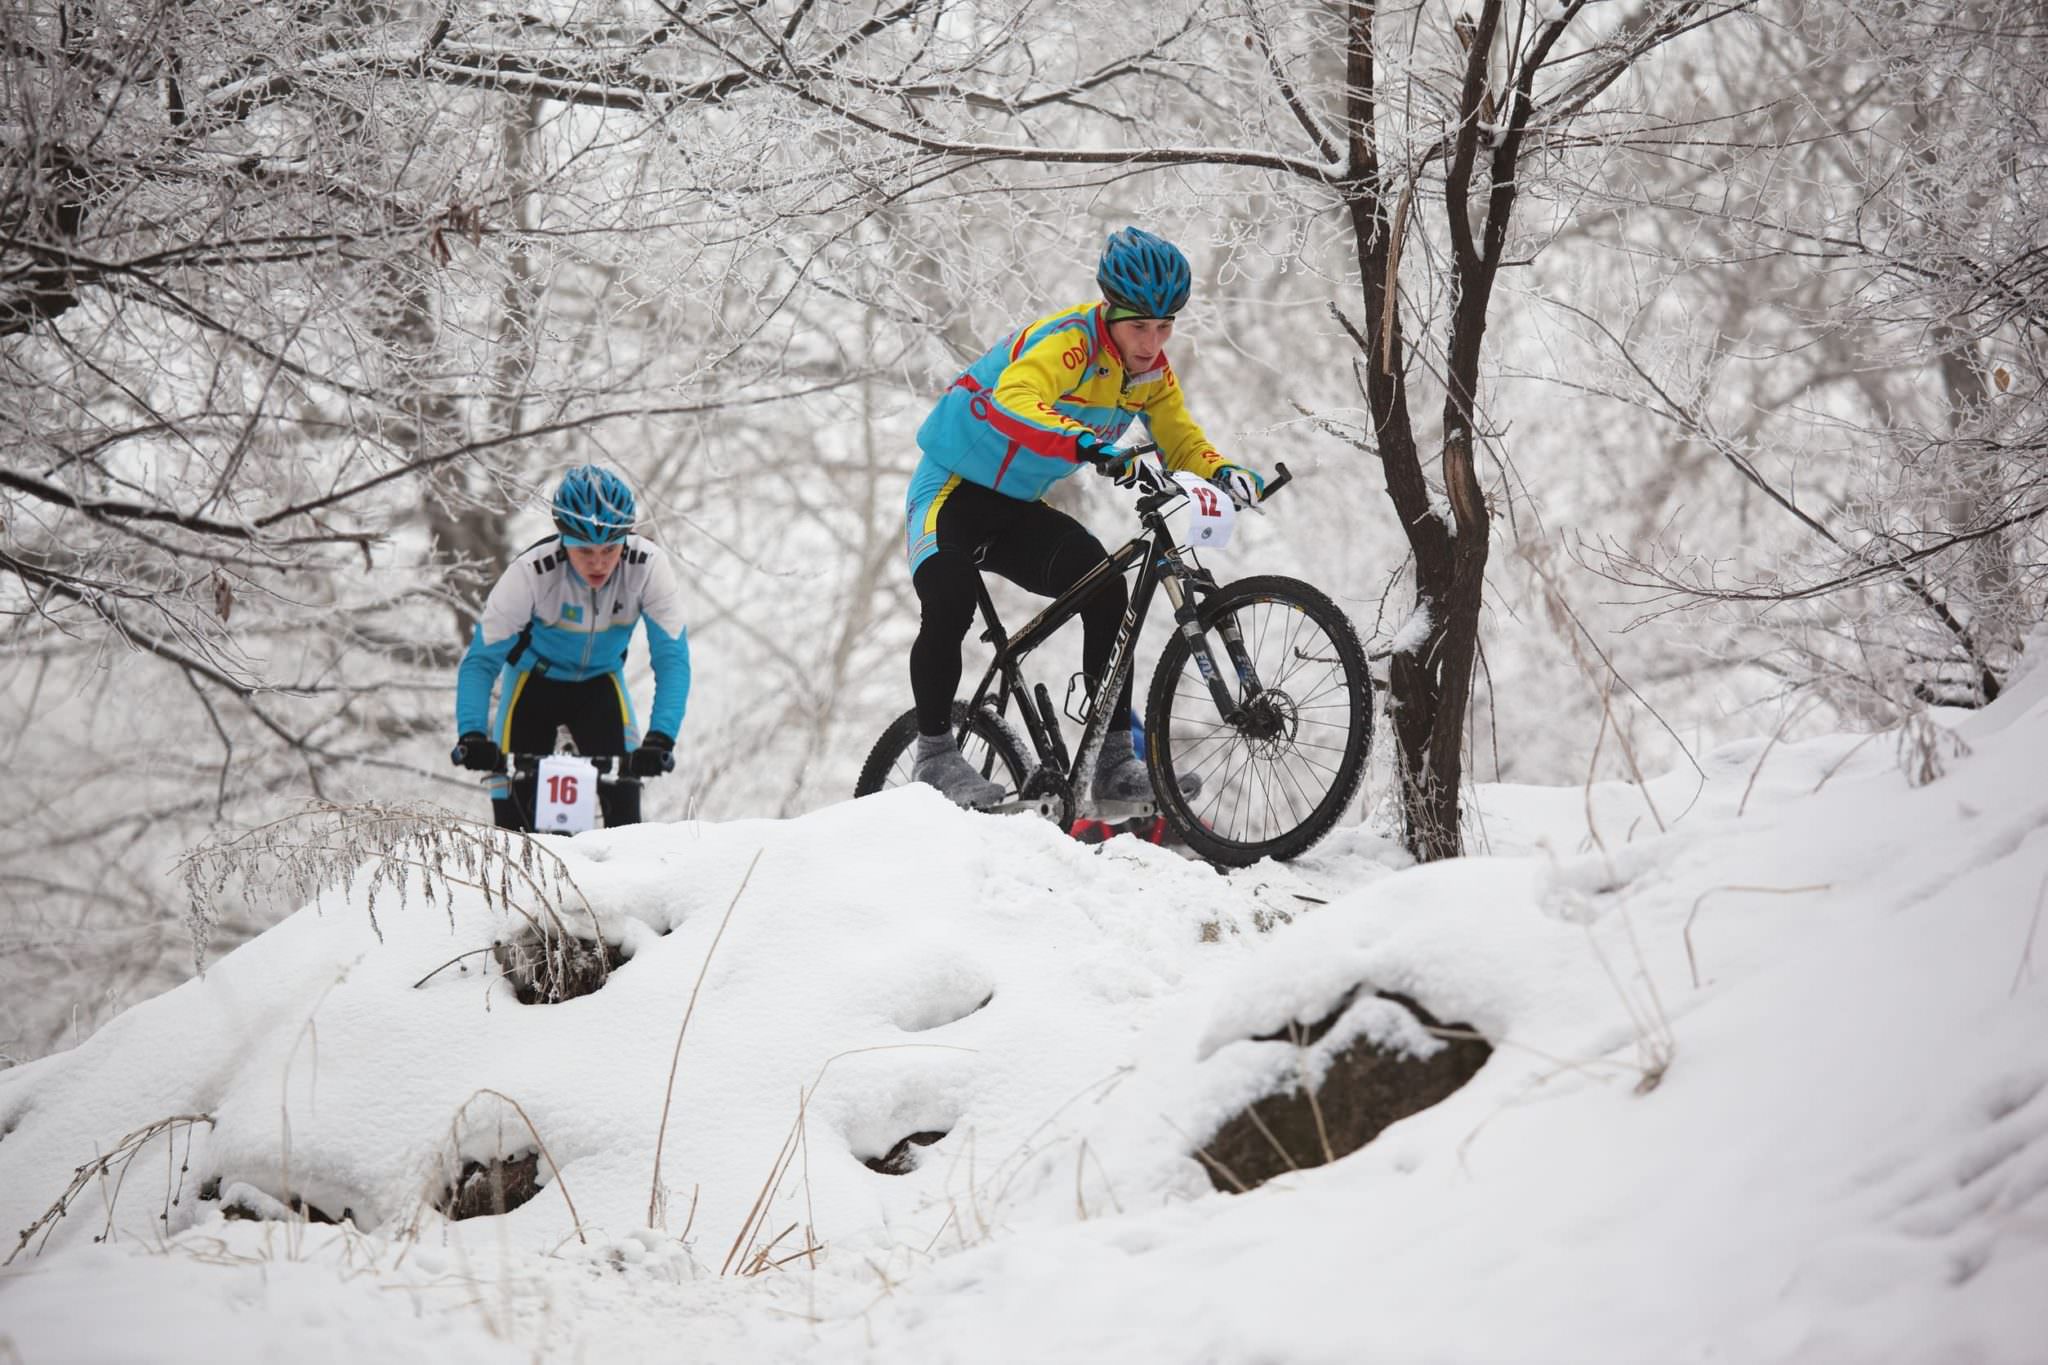 Winter cyclists in snow